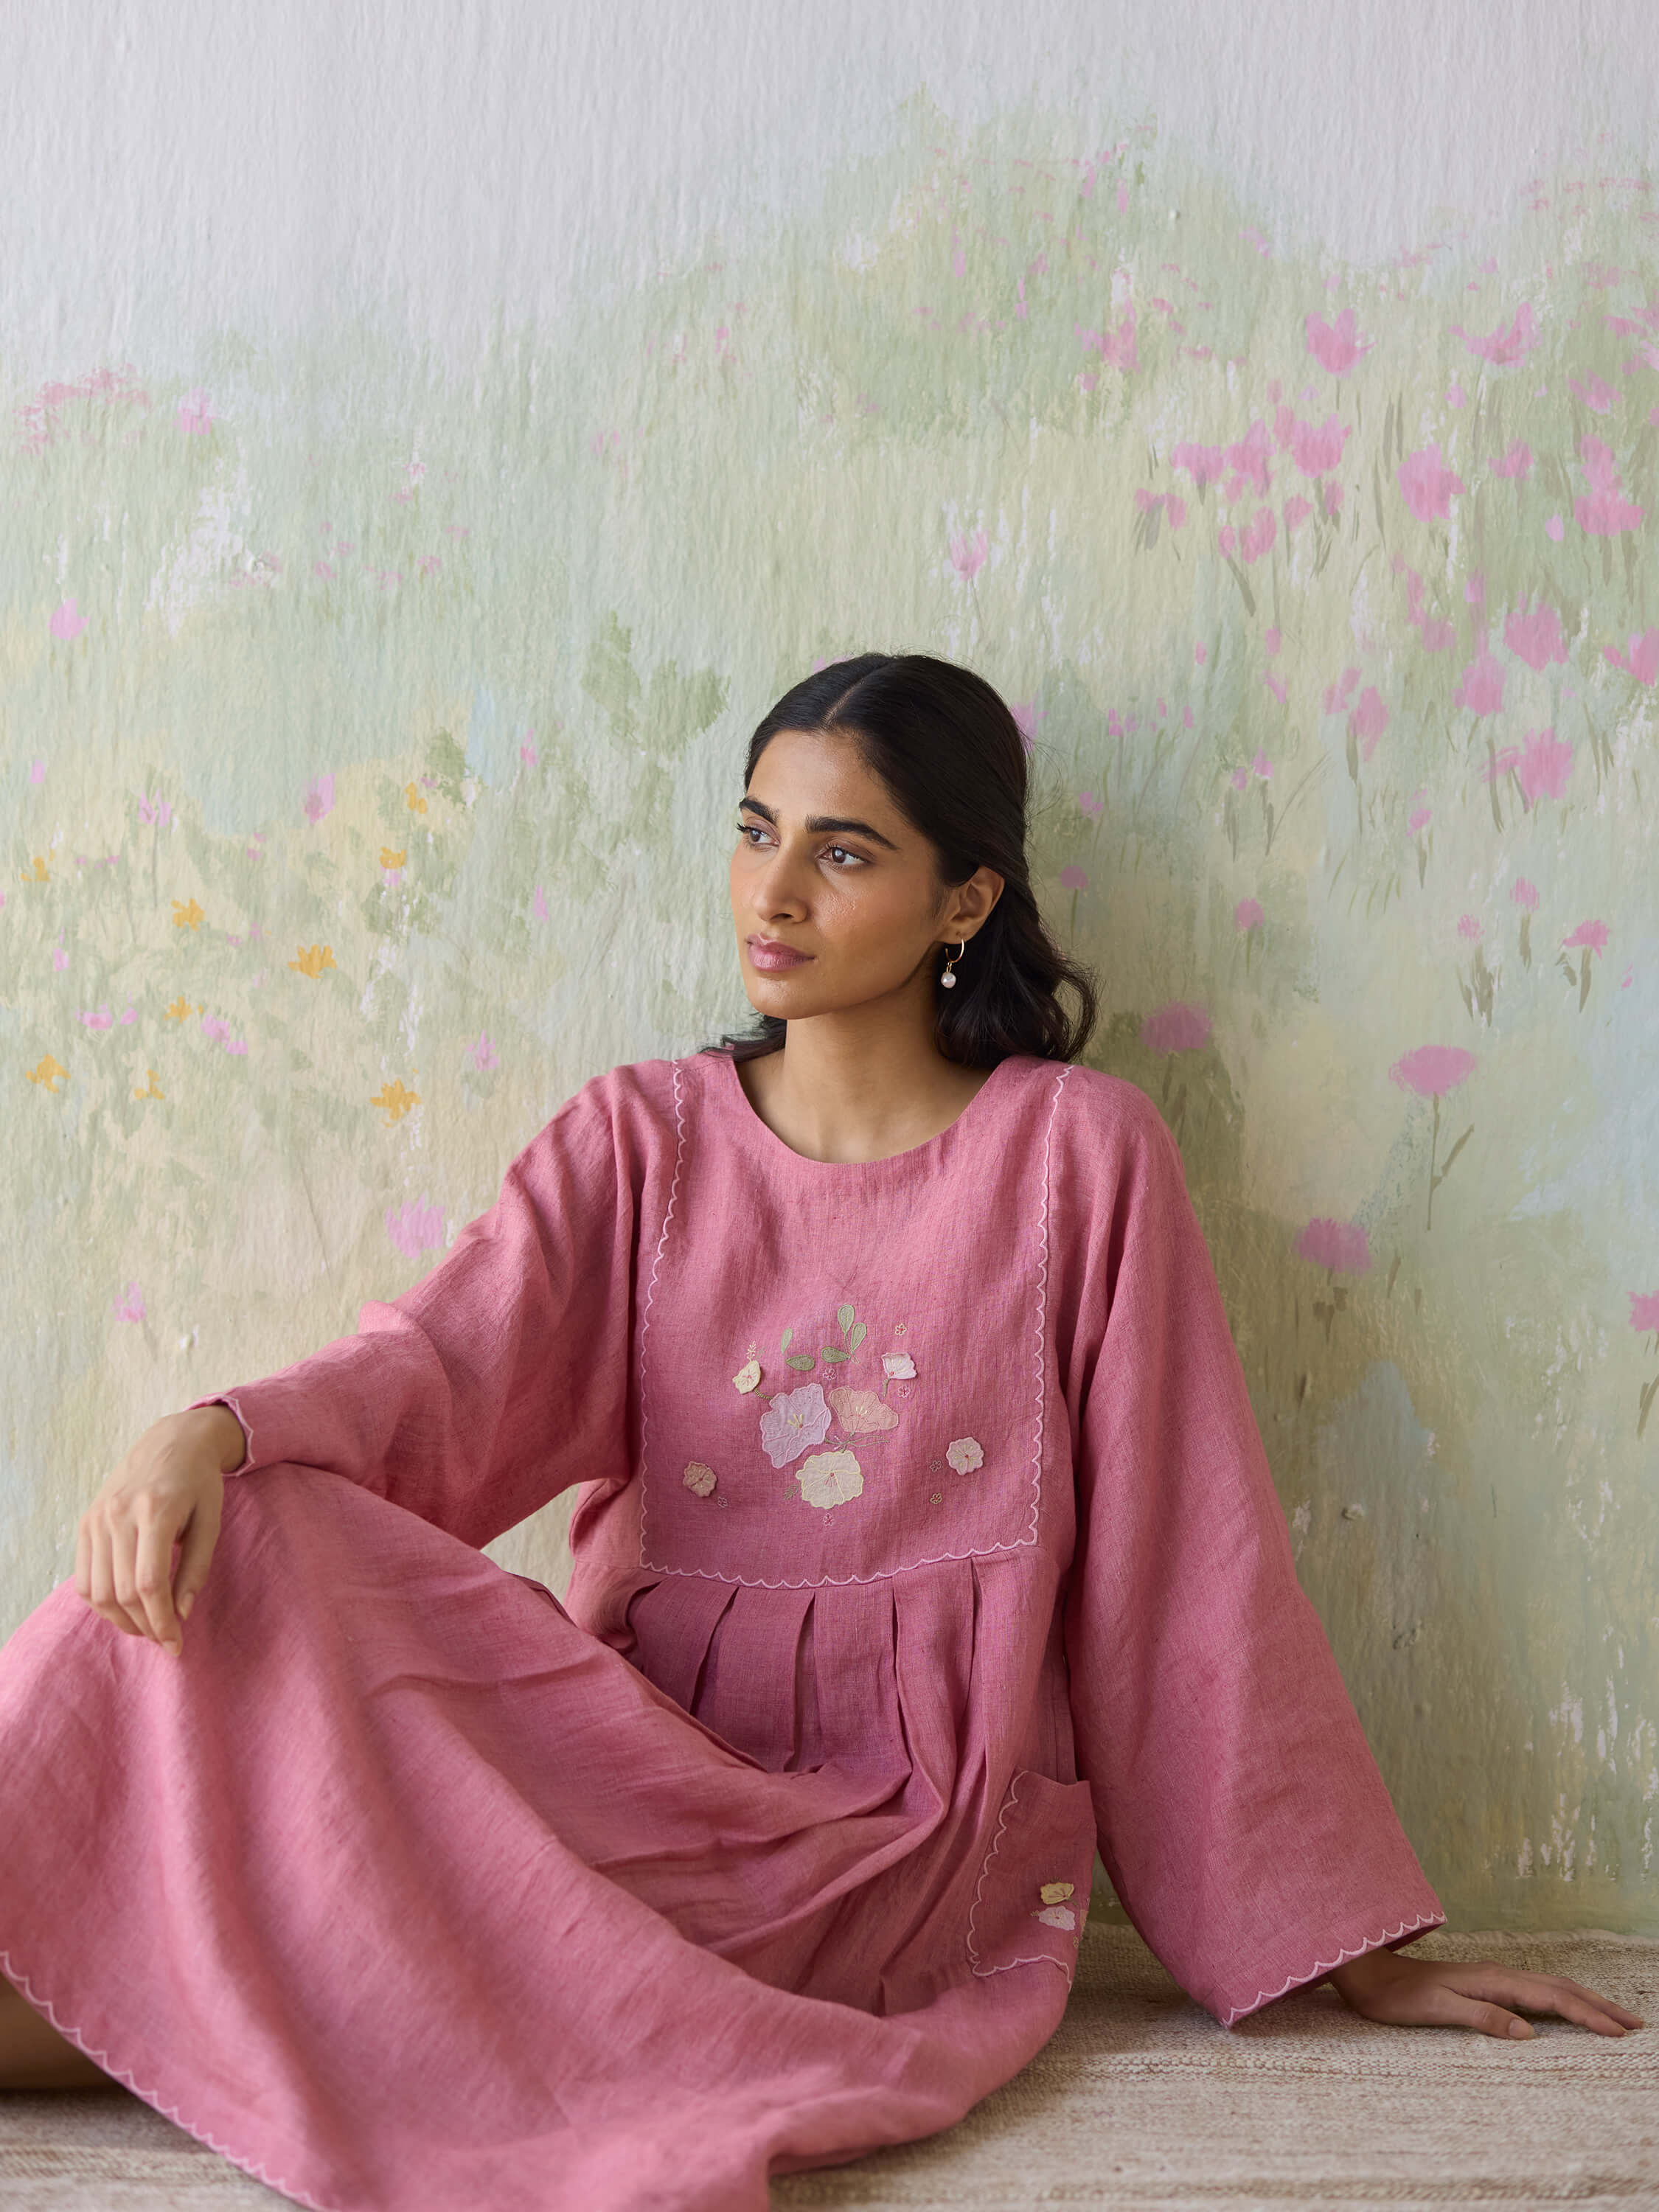 Woman in pink dress sitting against a floral painted wall.